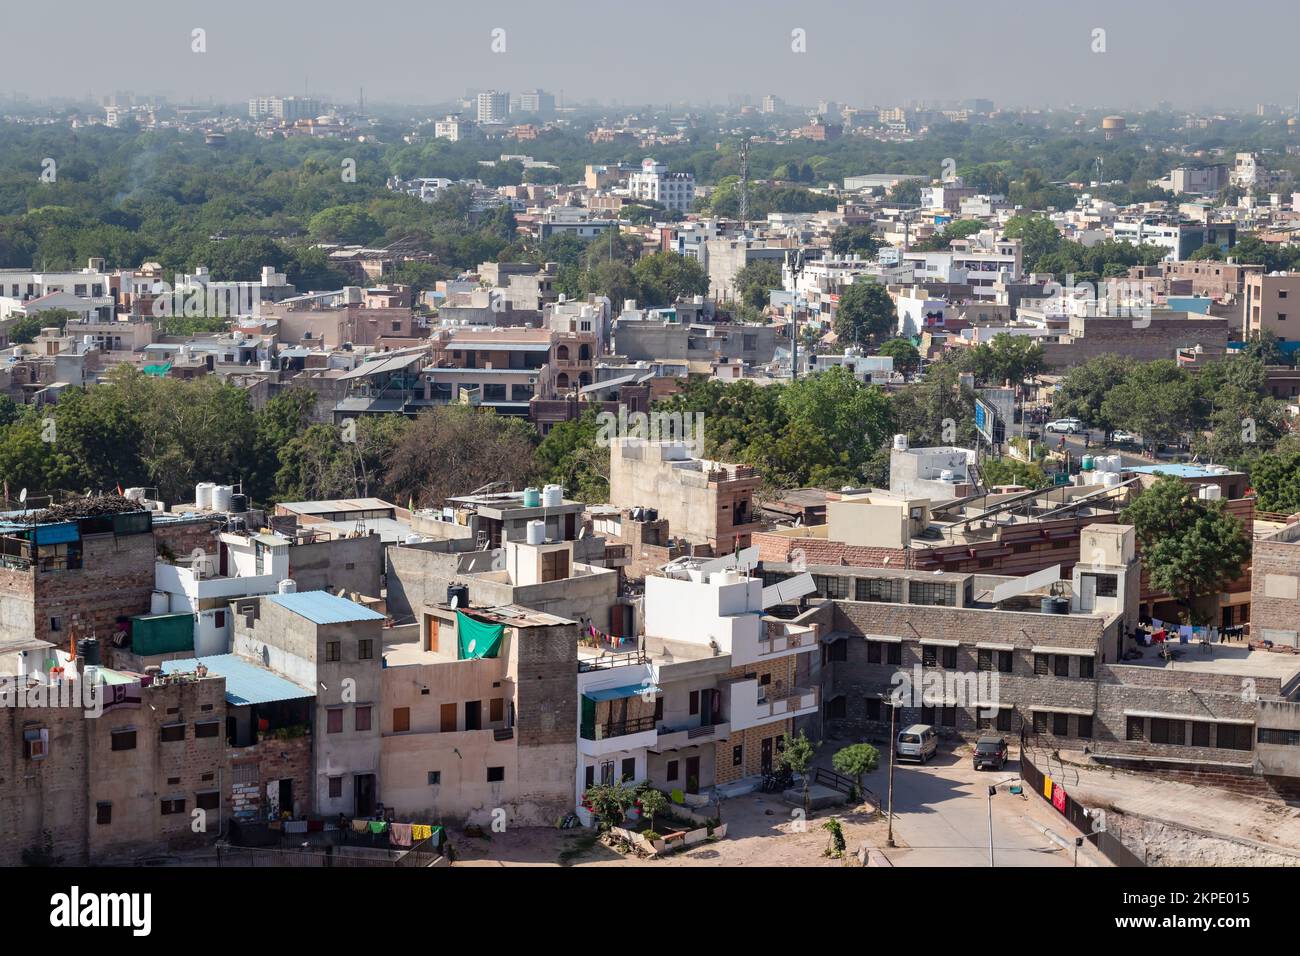 cityscape view of crowded town at morning from flat angle with flat sky Stock Photo